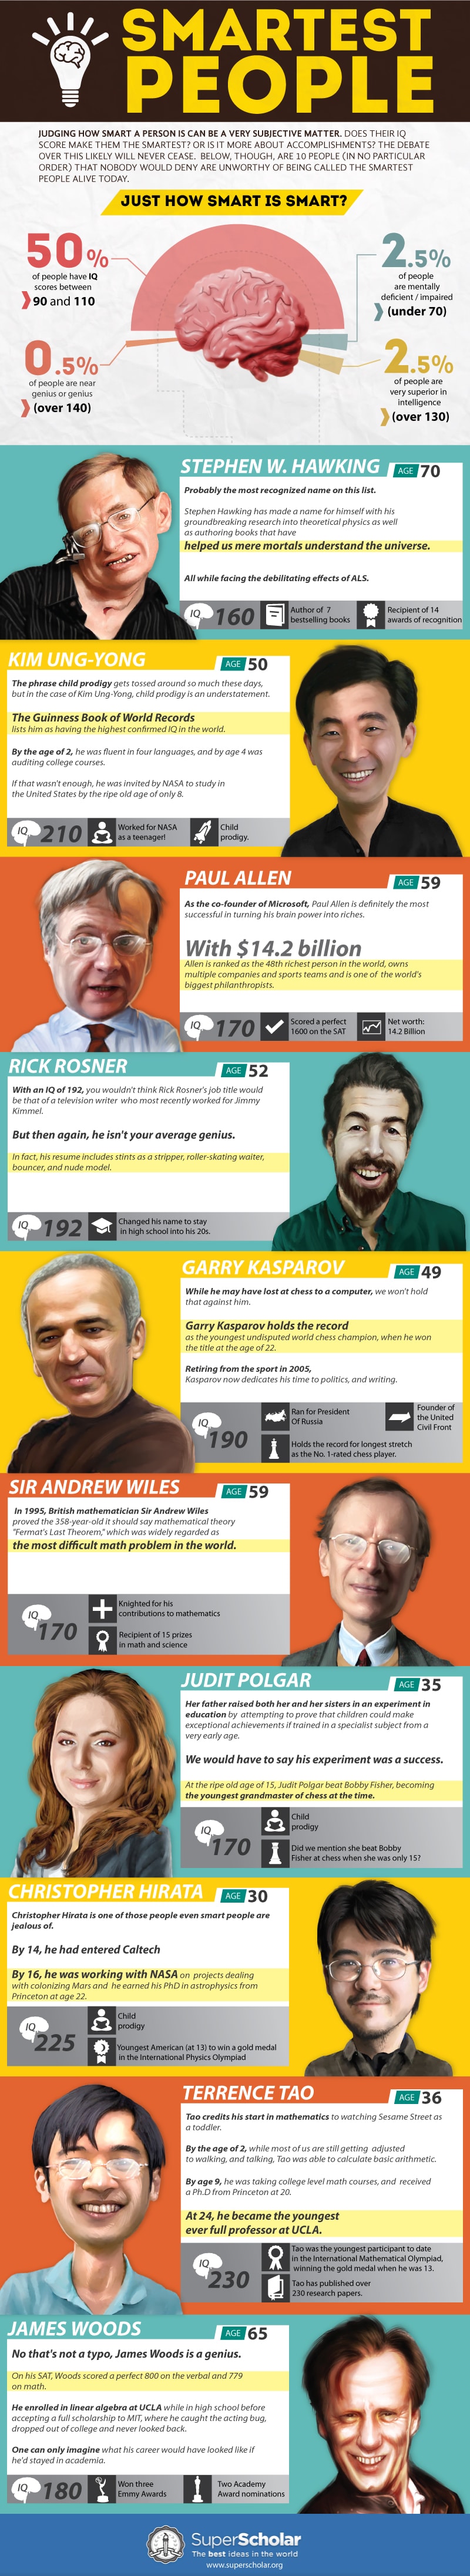 top-10-smartest-people-infographic